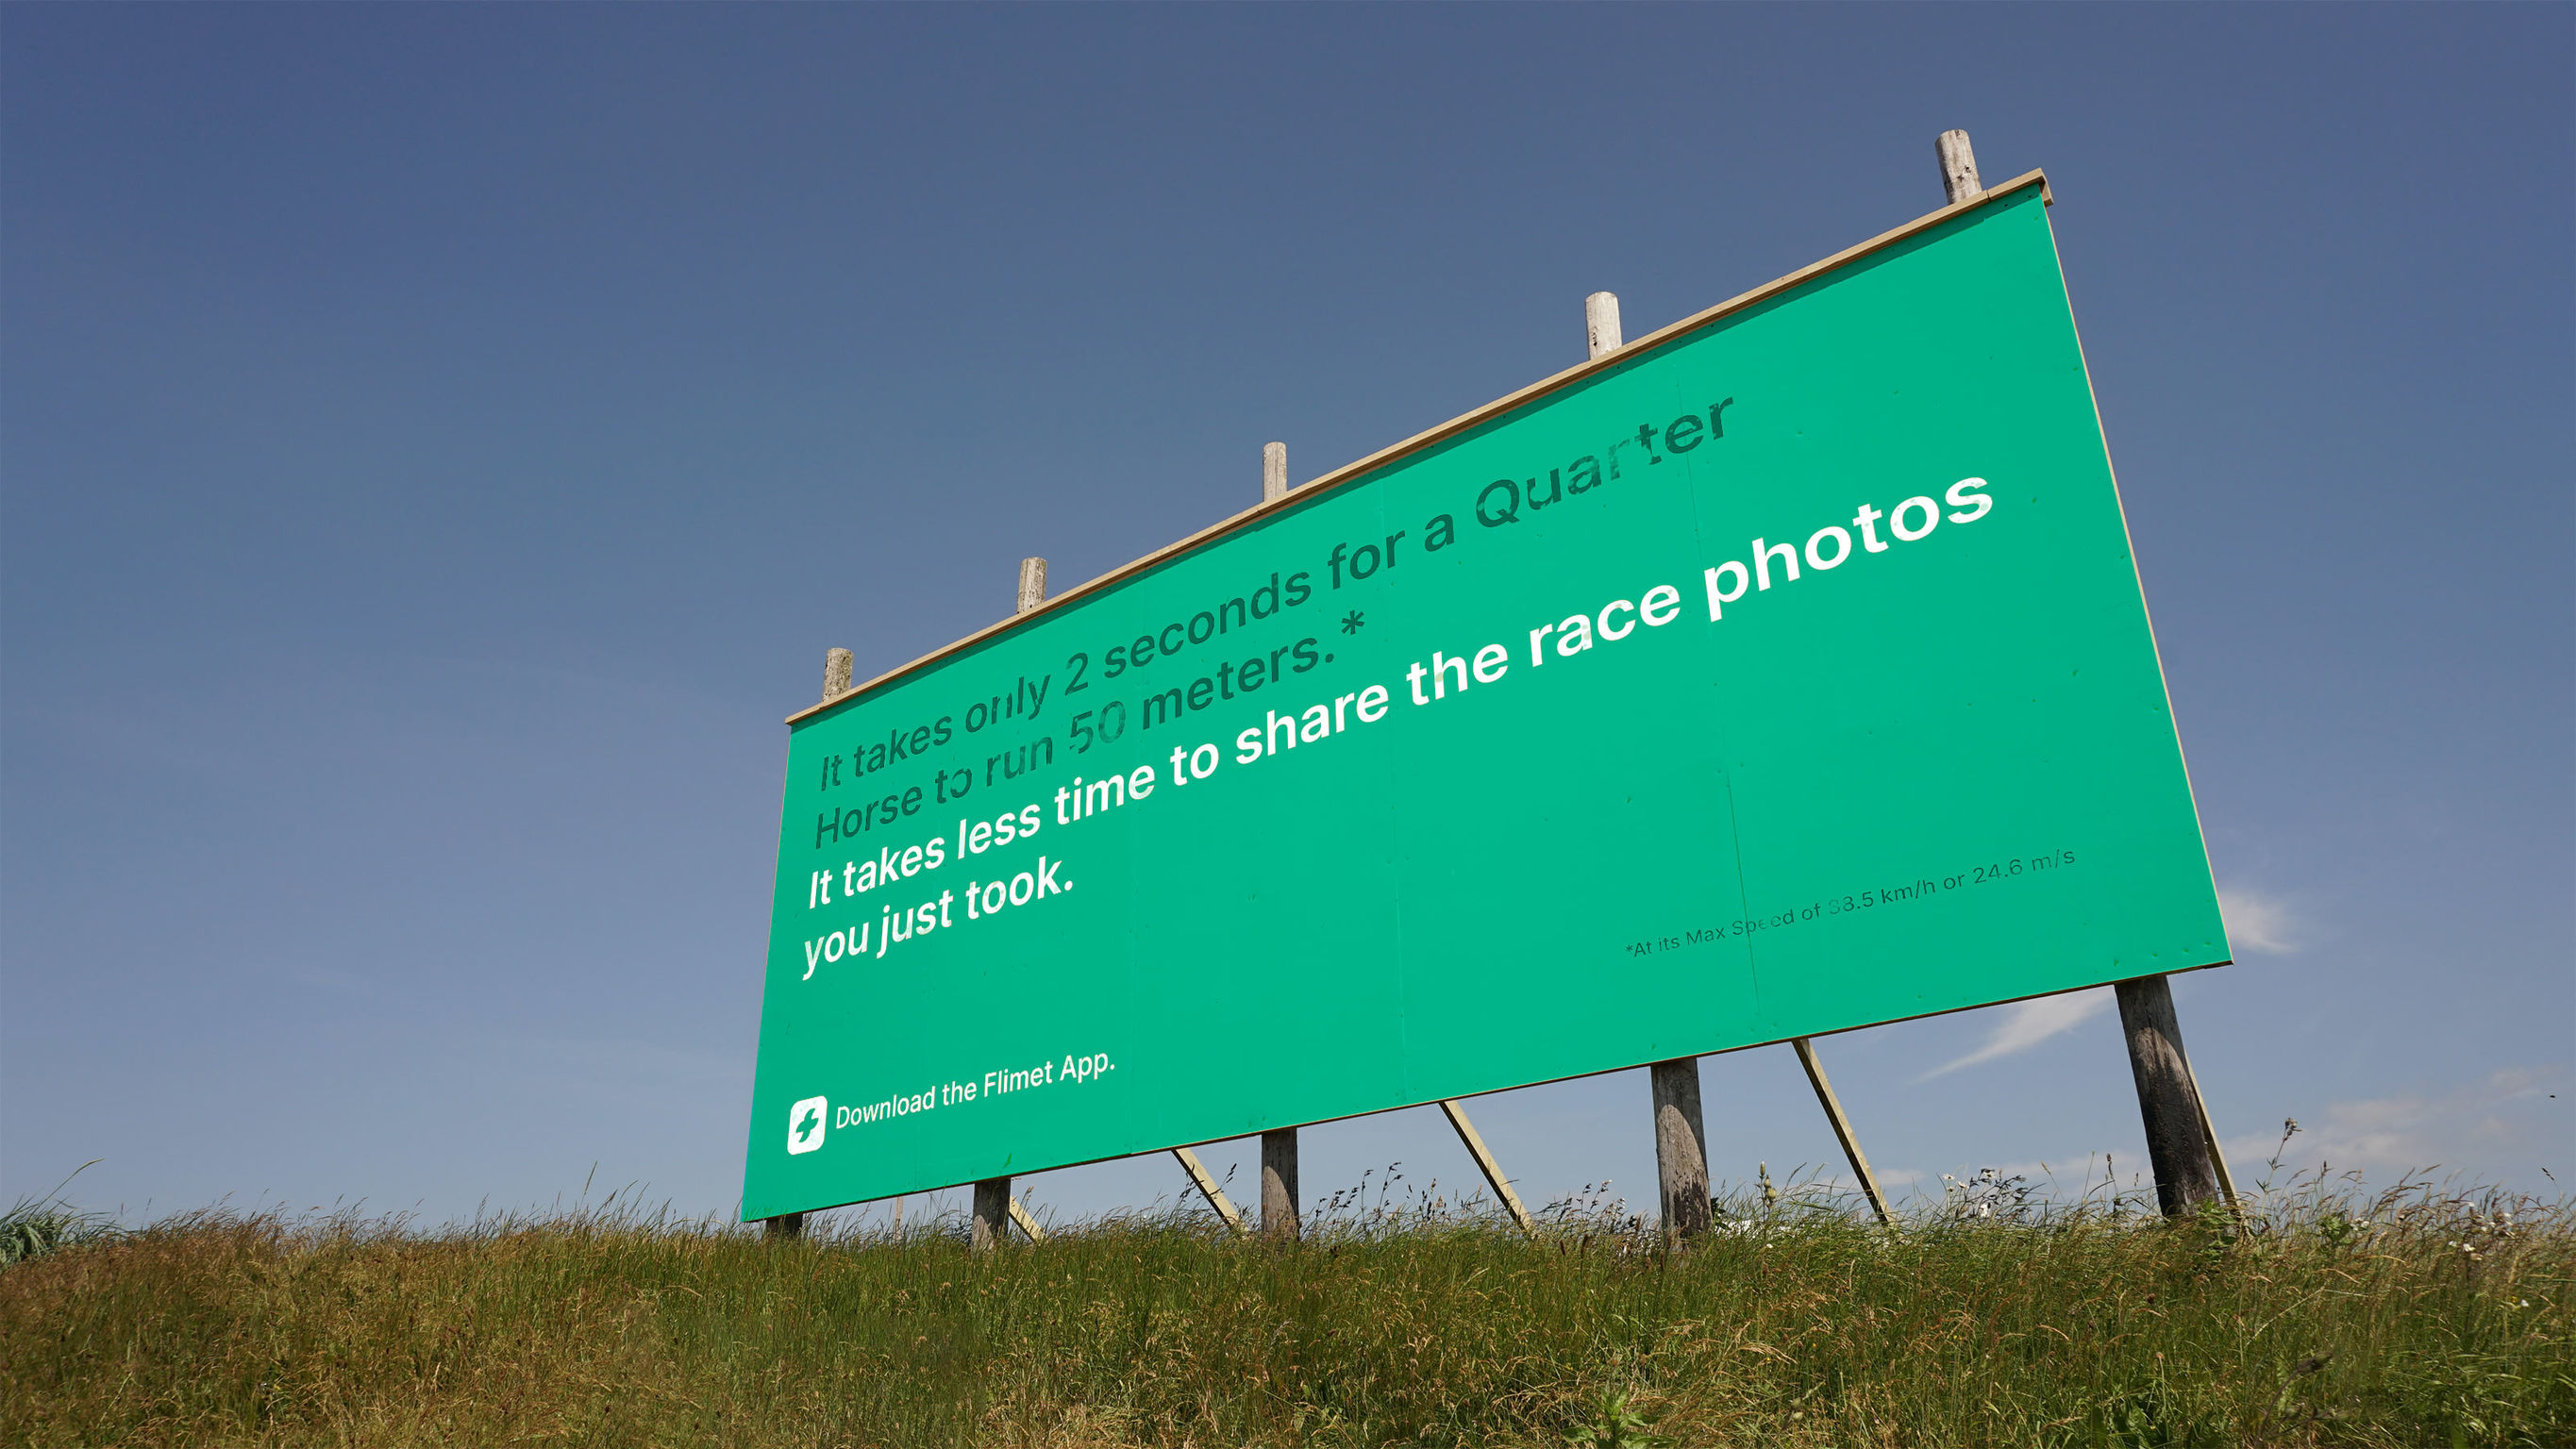 It takes less time to share the photos you just took..